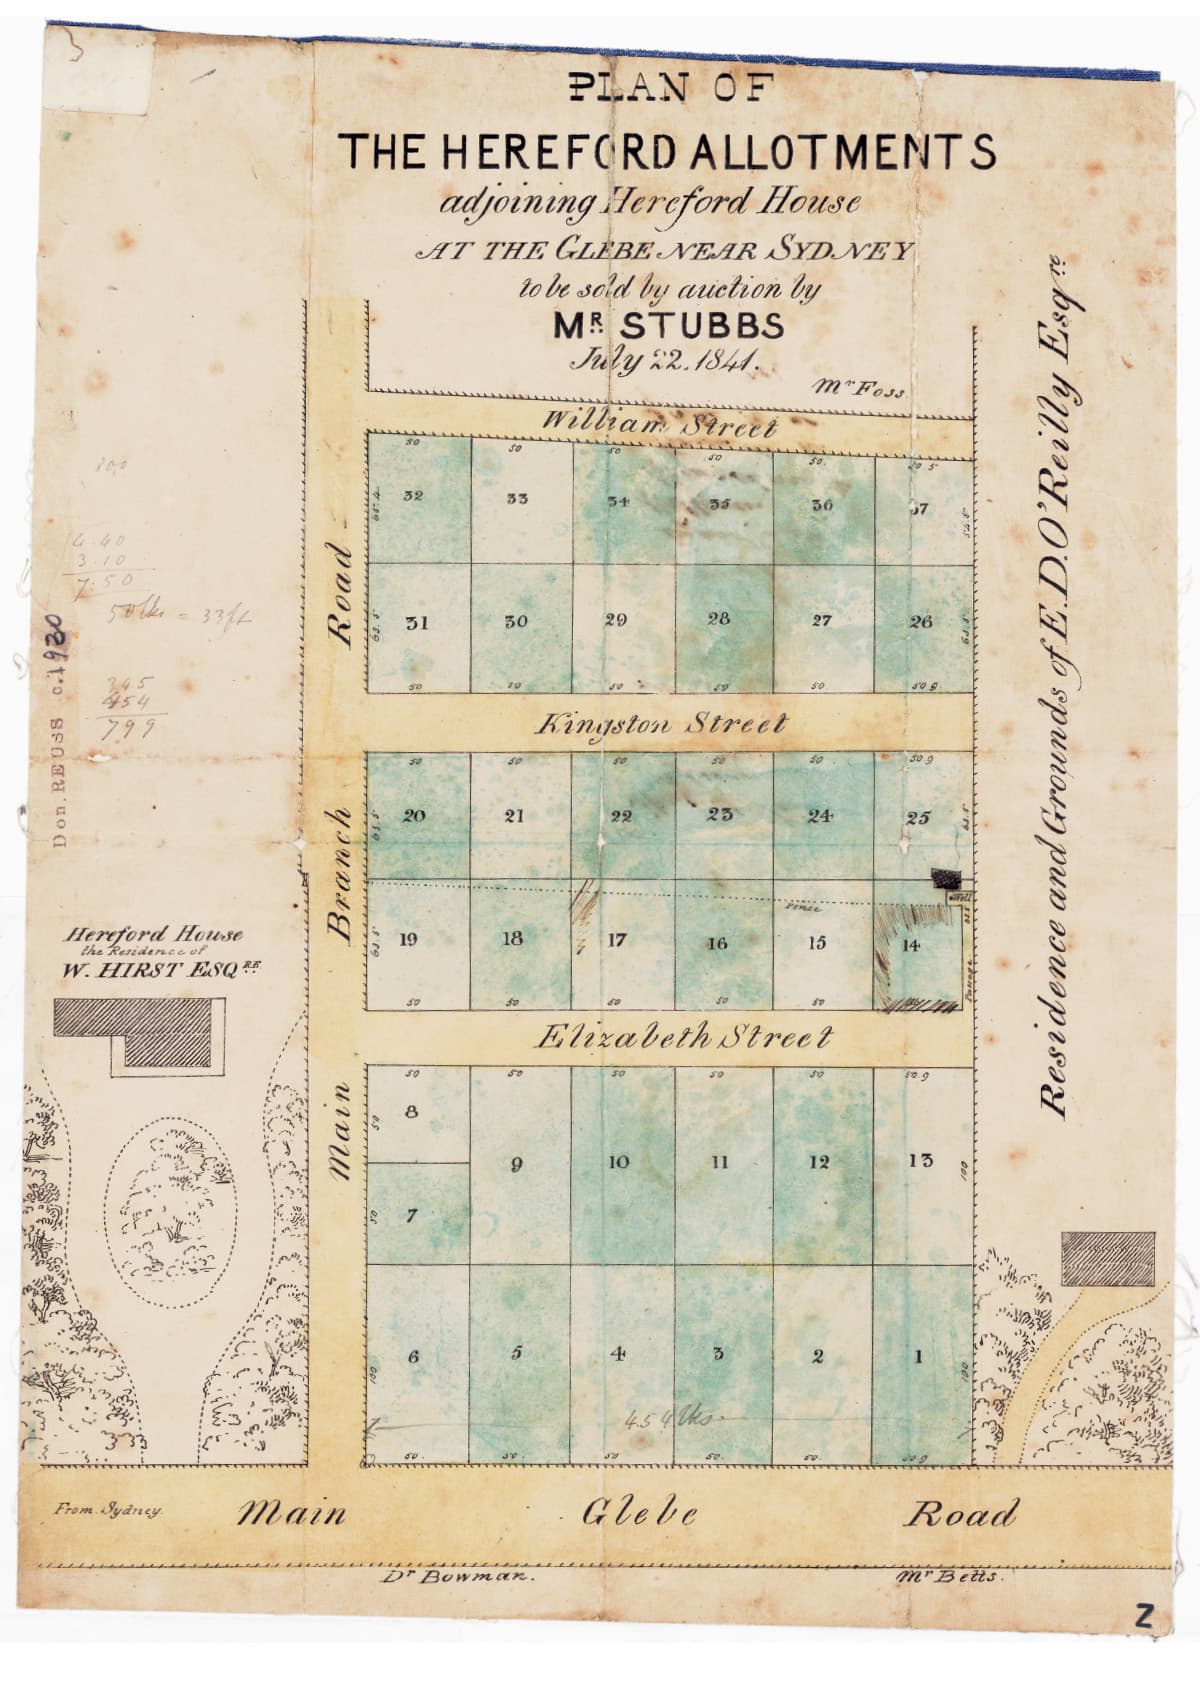 Plans of the Hereford Allotments